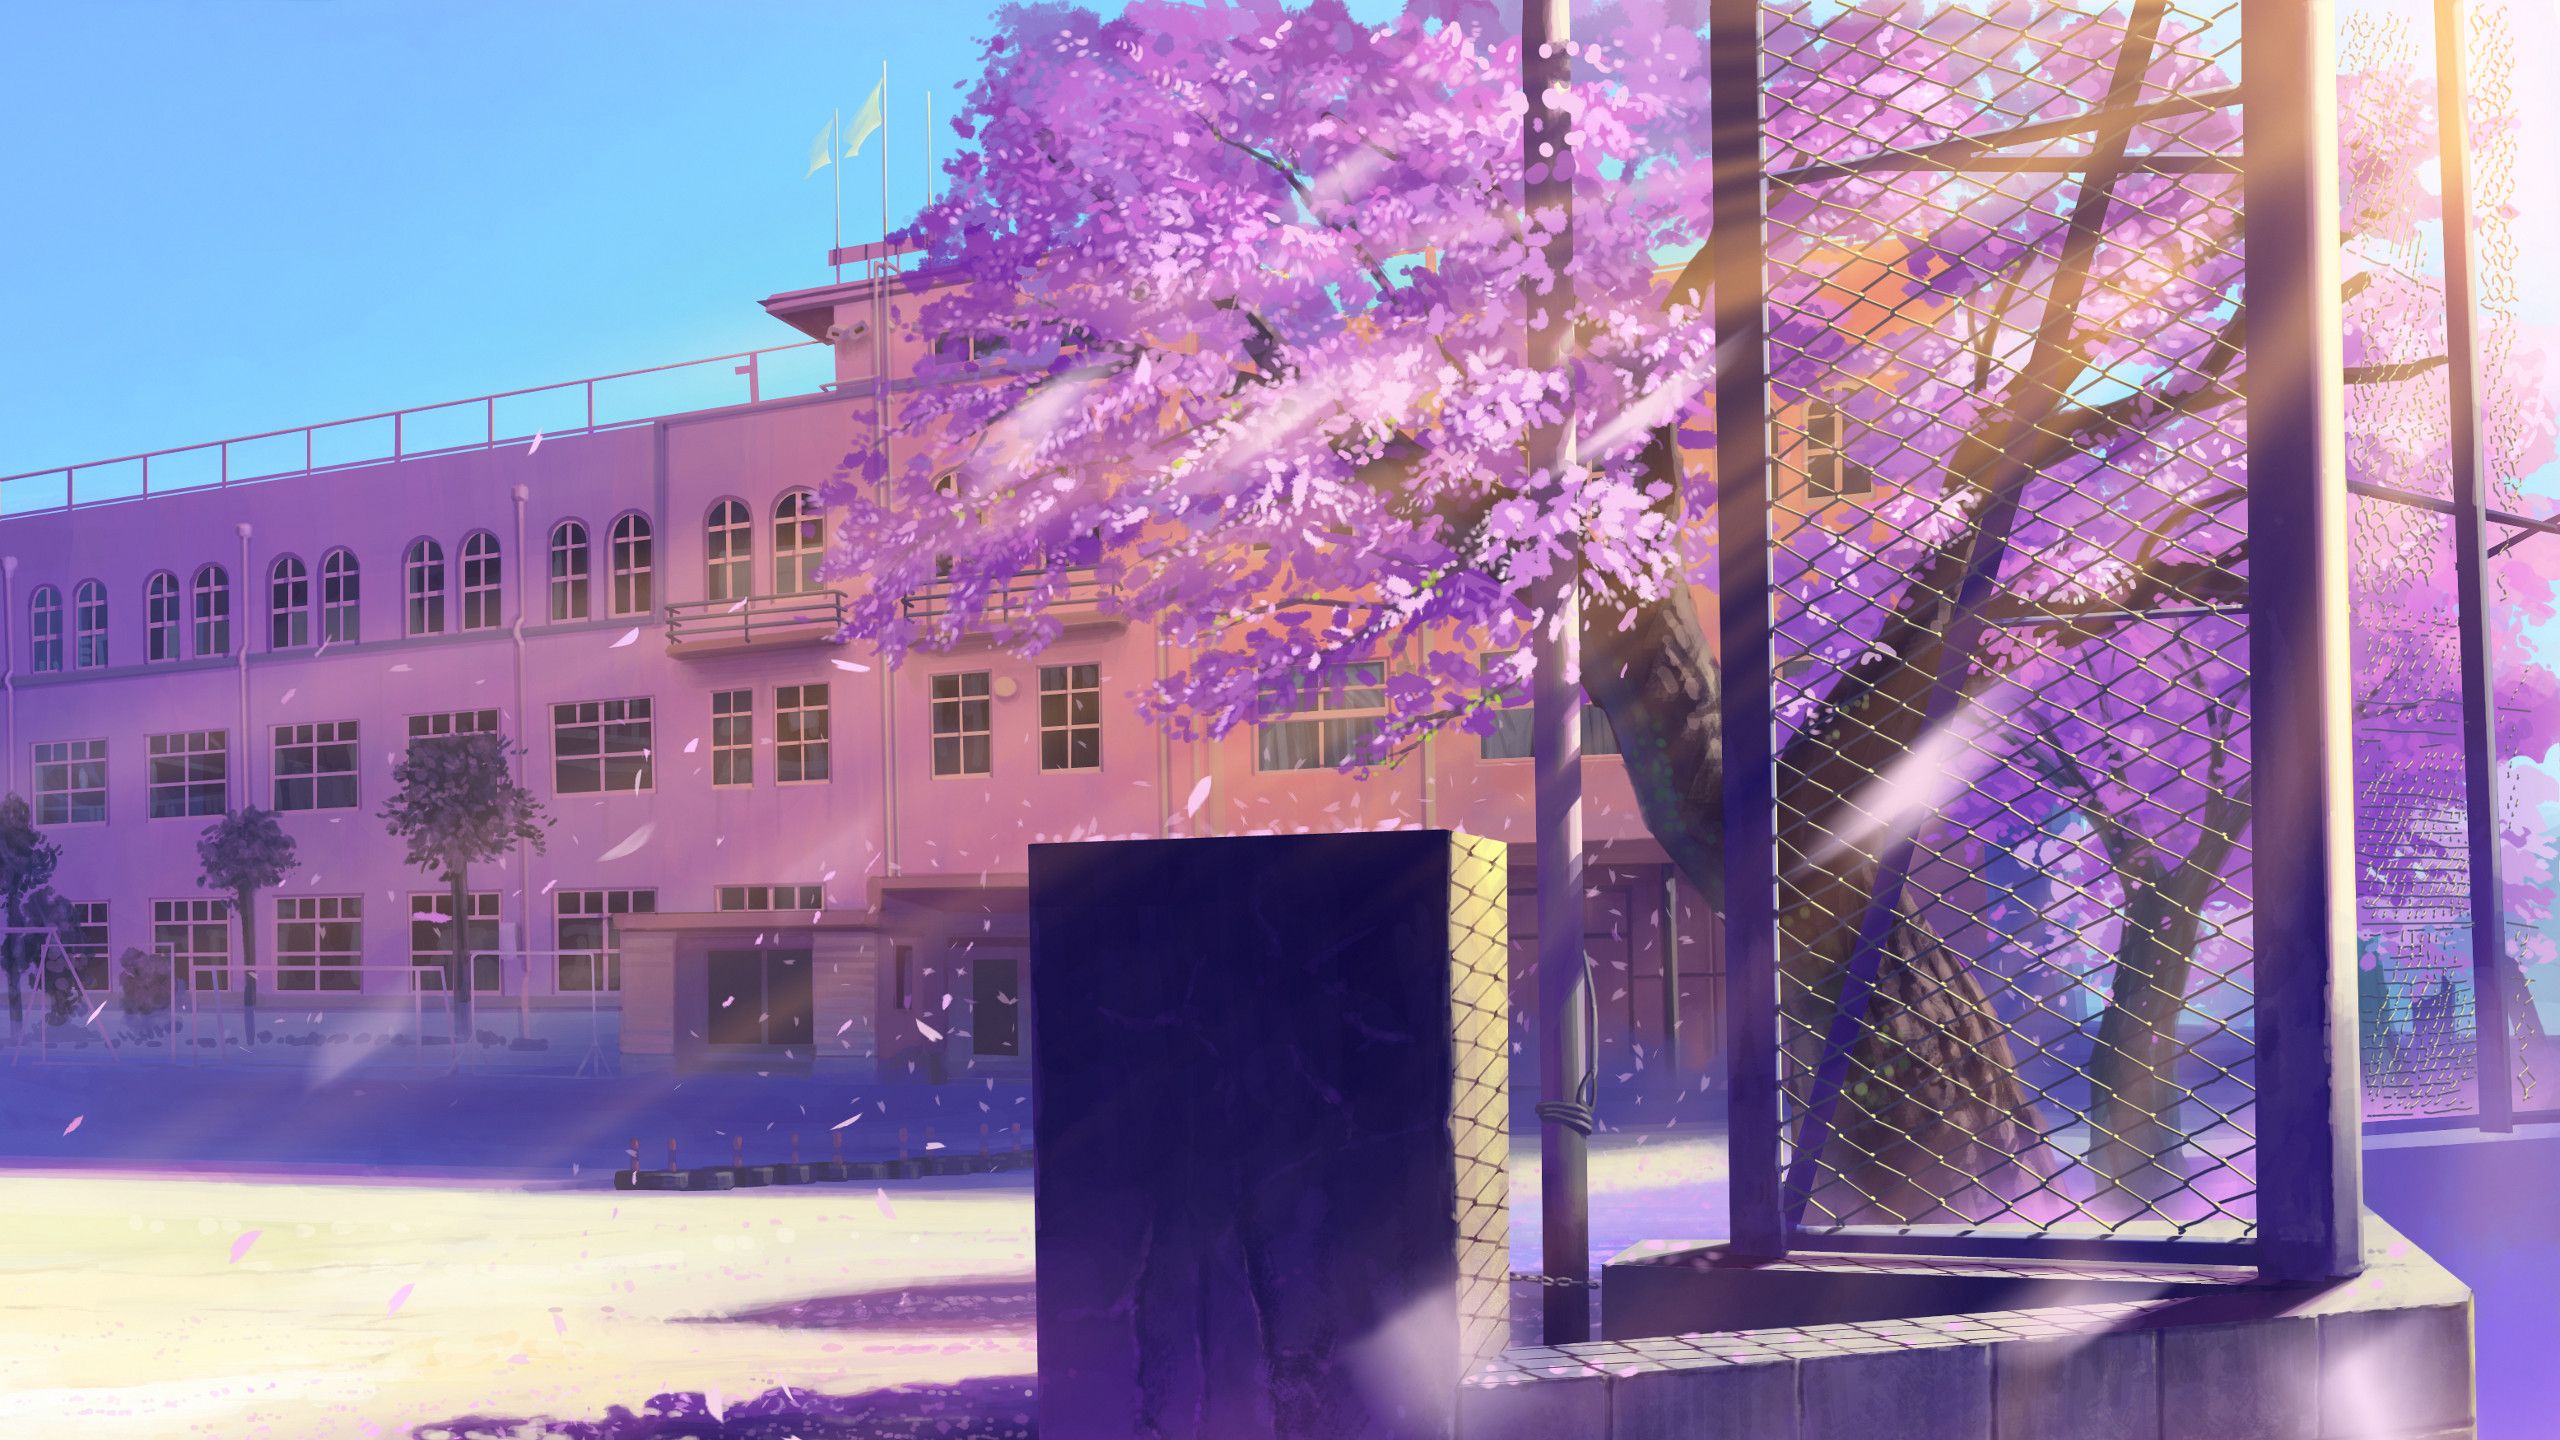 A purple tree in front of an old building - Anime landscape, school